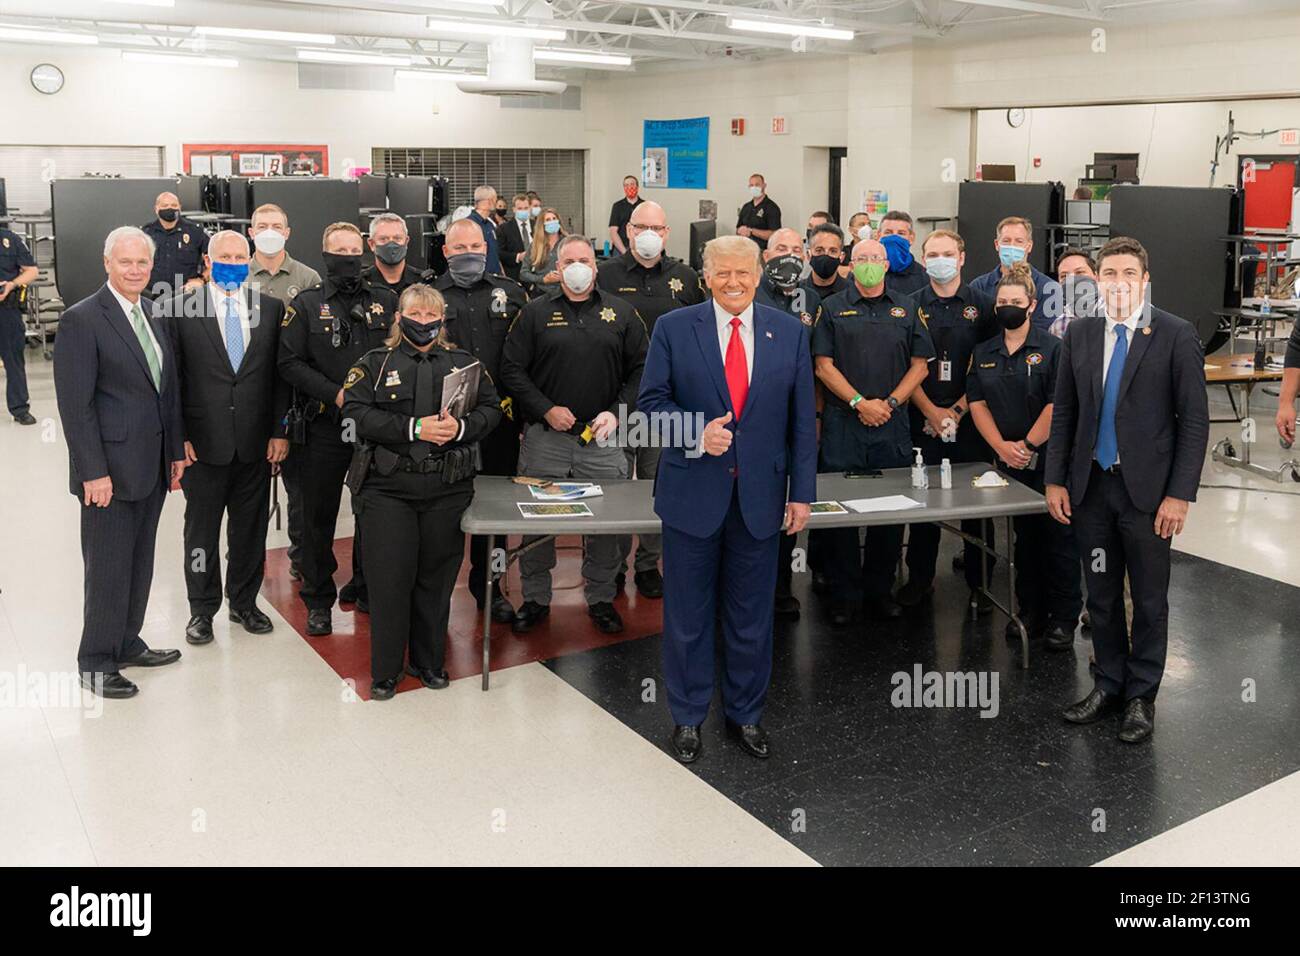 President Donald Trump is joined by Rep. Bryan Steil R- Wis. Senator Ron Johnson. R-Wis and law enforcement officials as he concludes his tour at the emergency operation center Tuesday Sept. 1 2020 at Mary D. Bradford High School in Kenosha Wis. Stock Photo